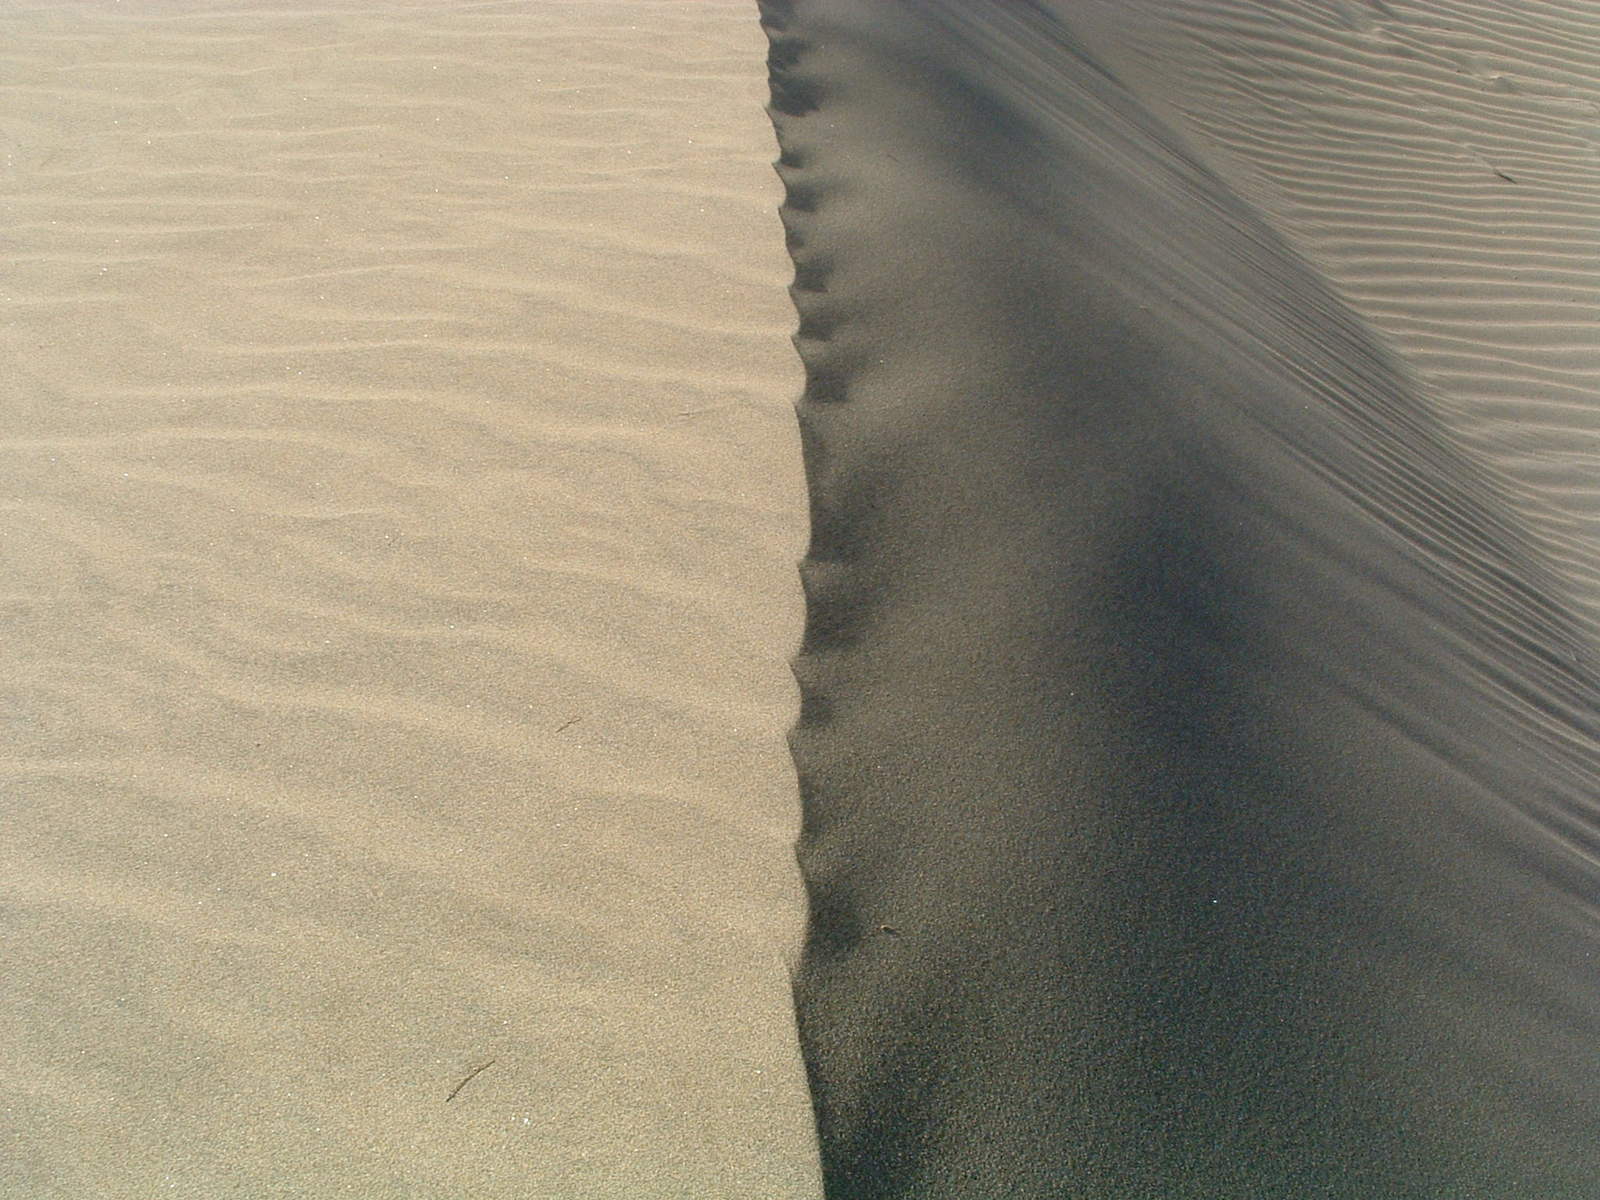 some lines and sand at the edge of an empty area